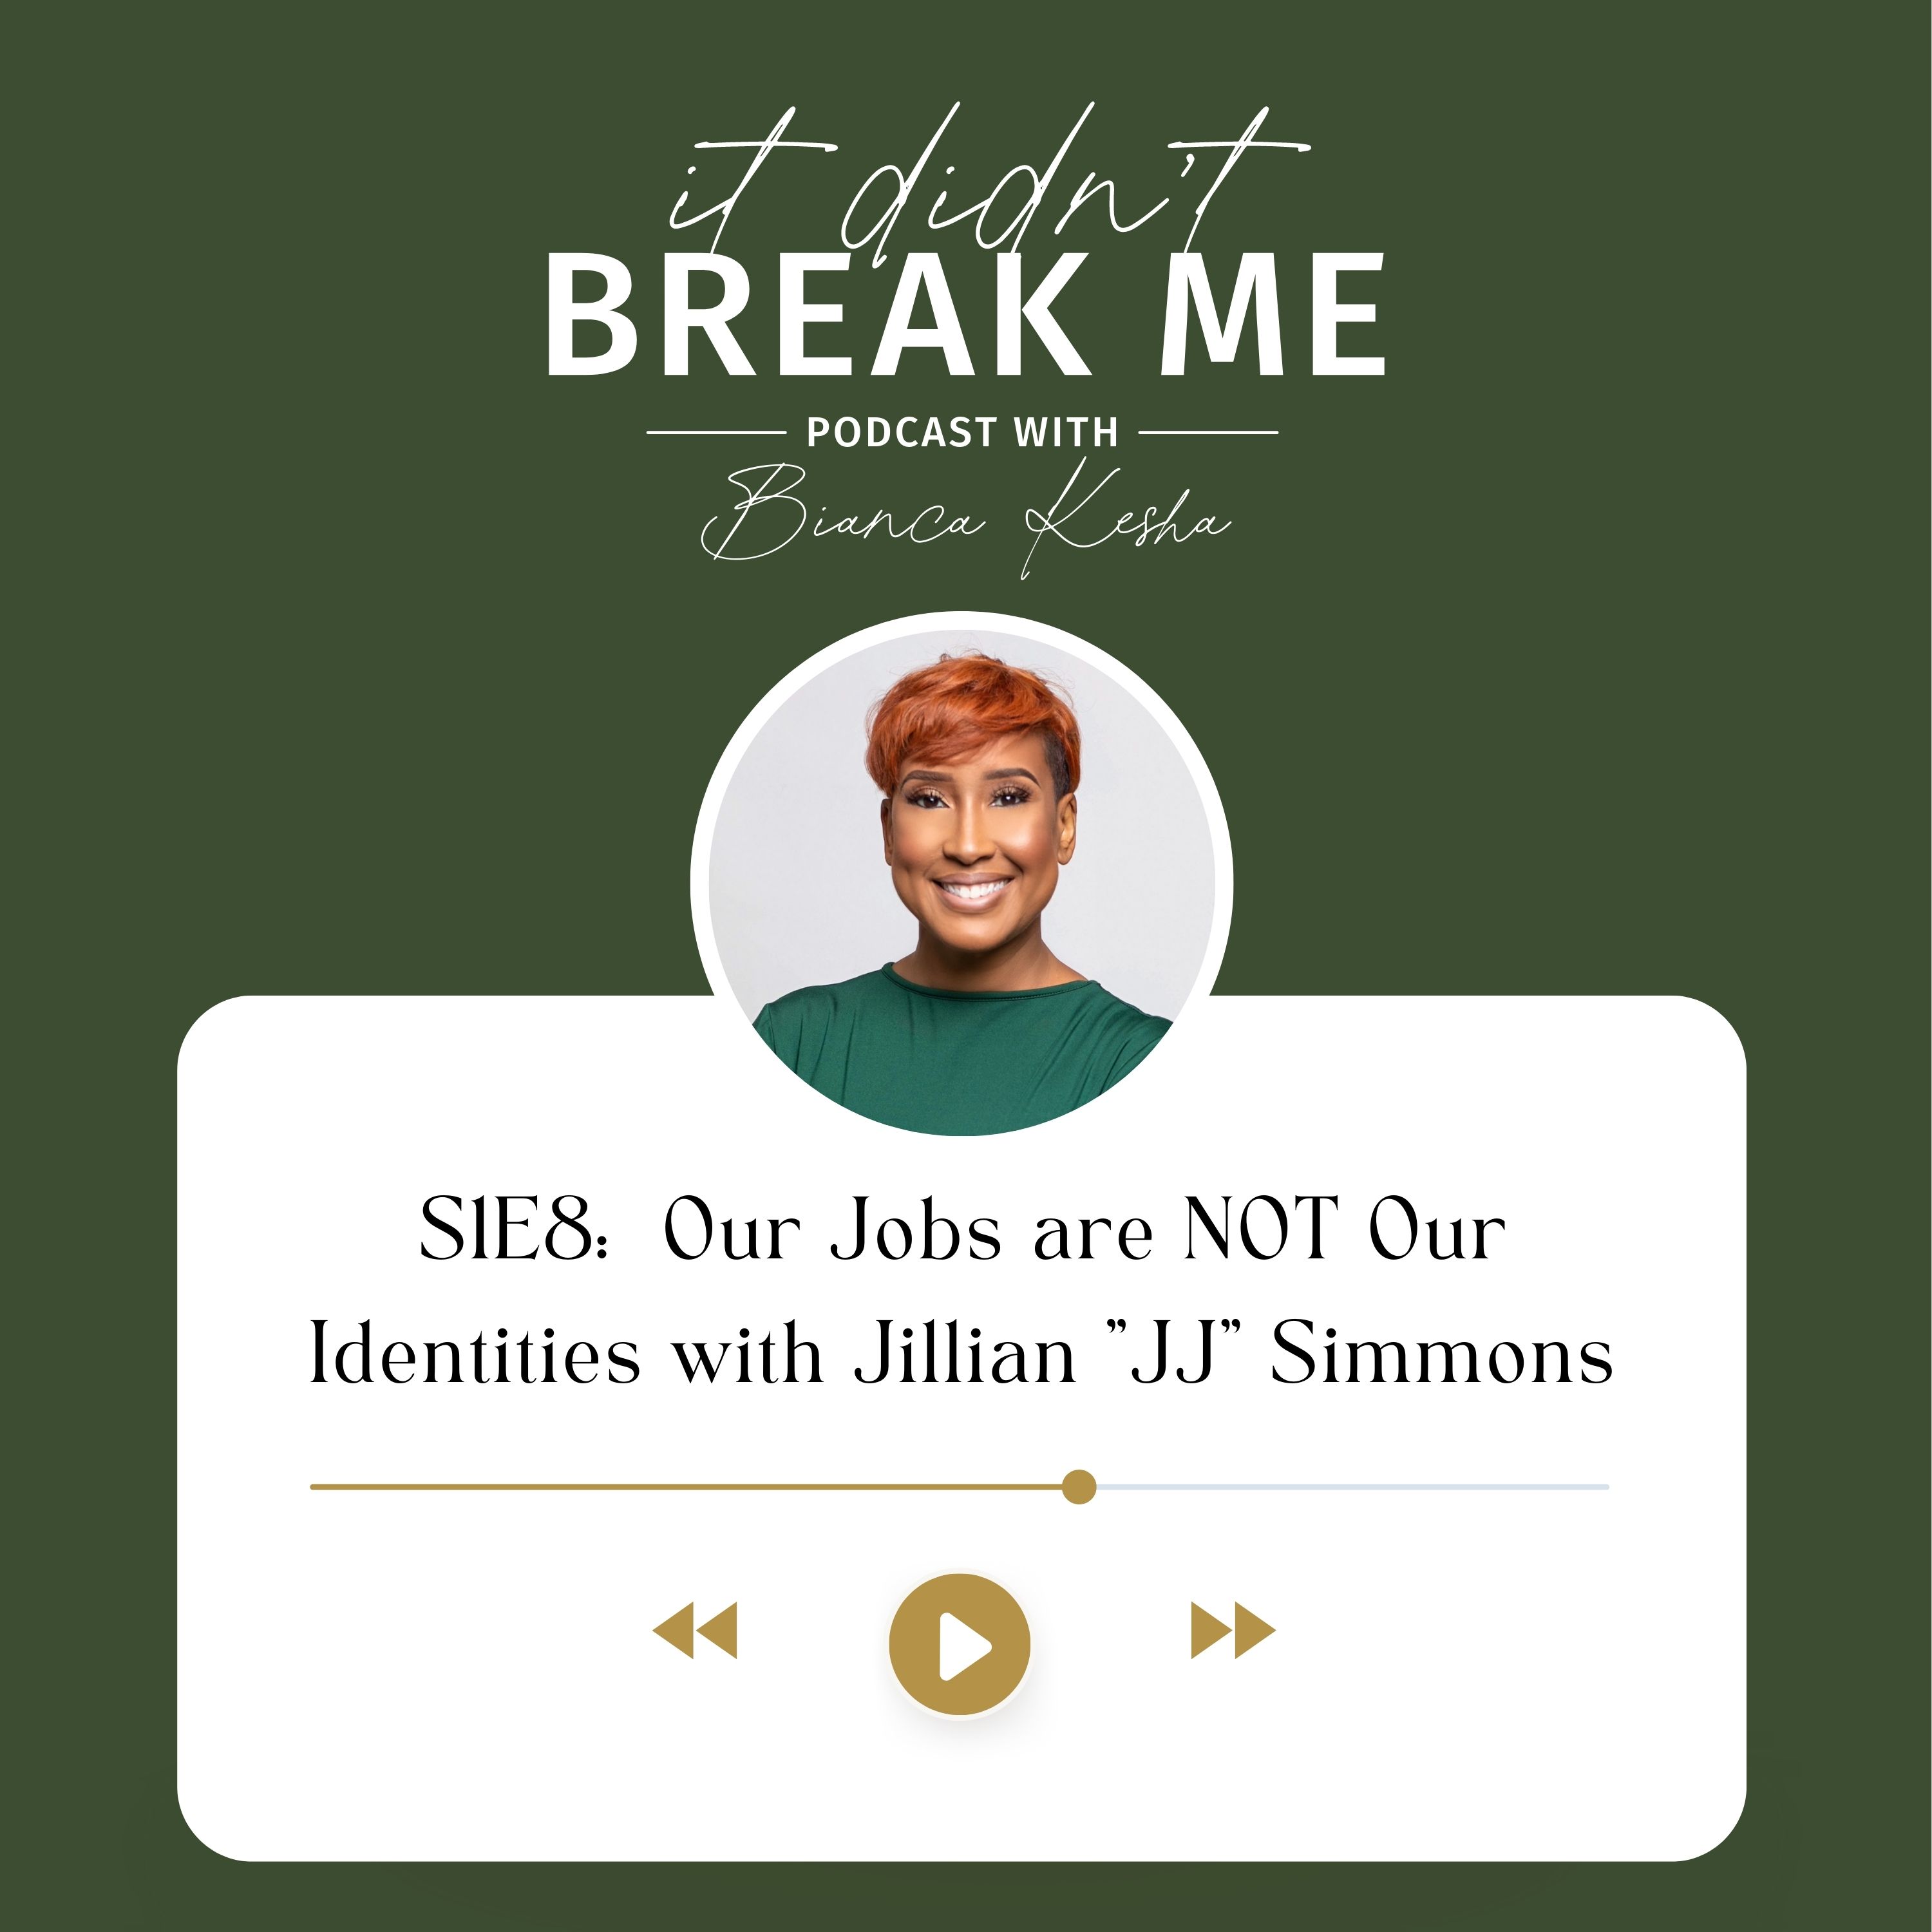 Our Jobs are NOT Our Identities with Jillian "JJ" Simmons Image